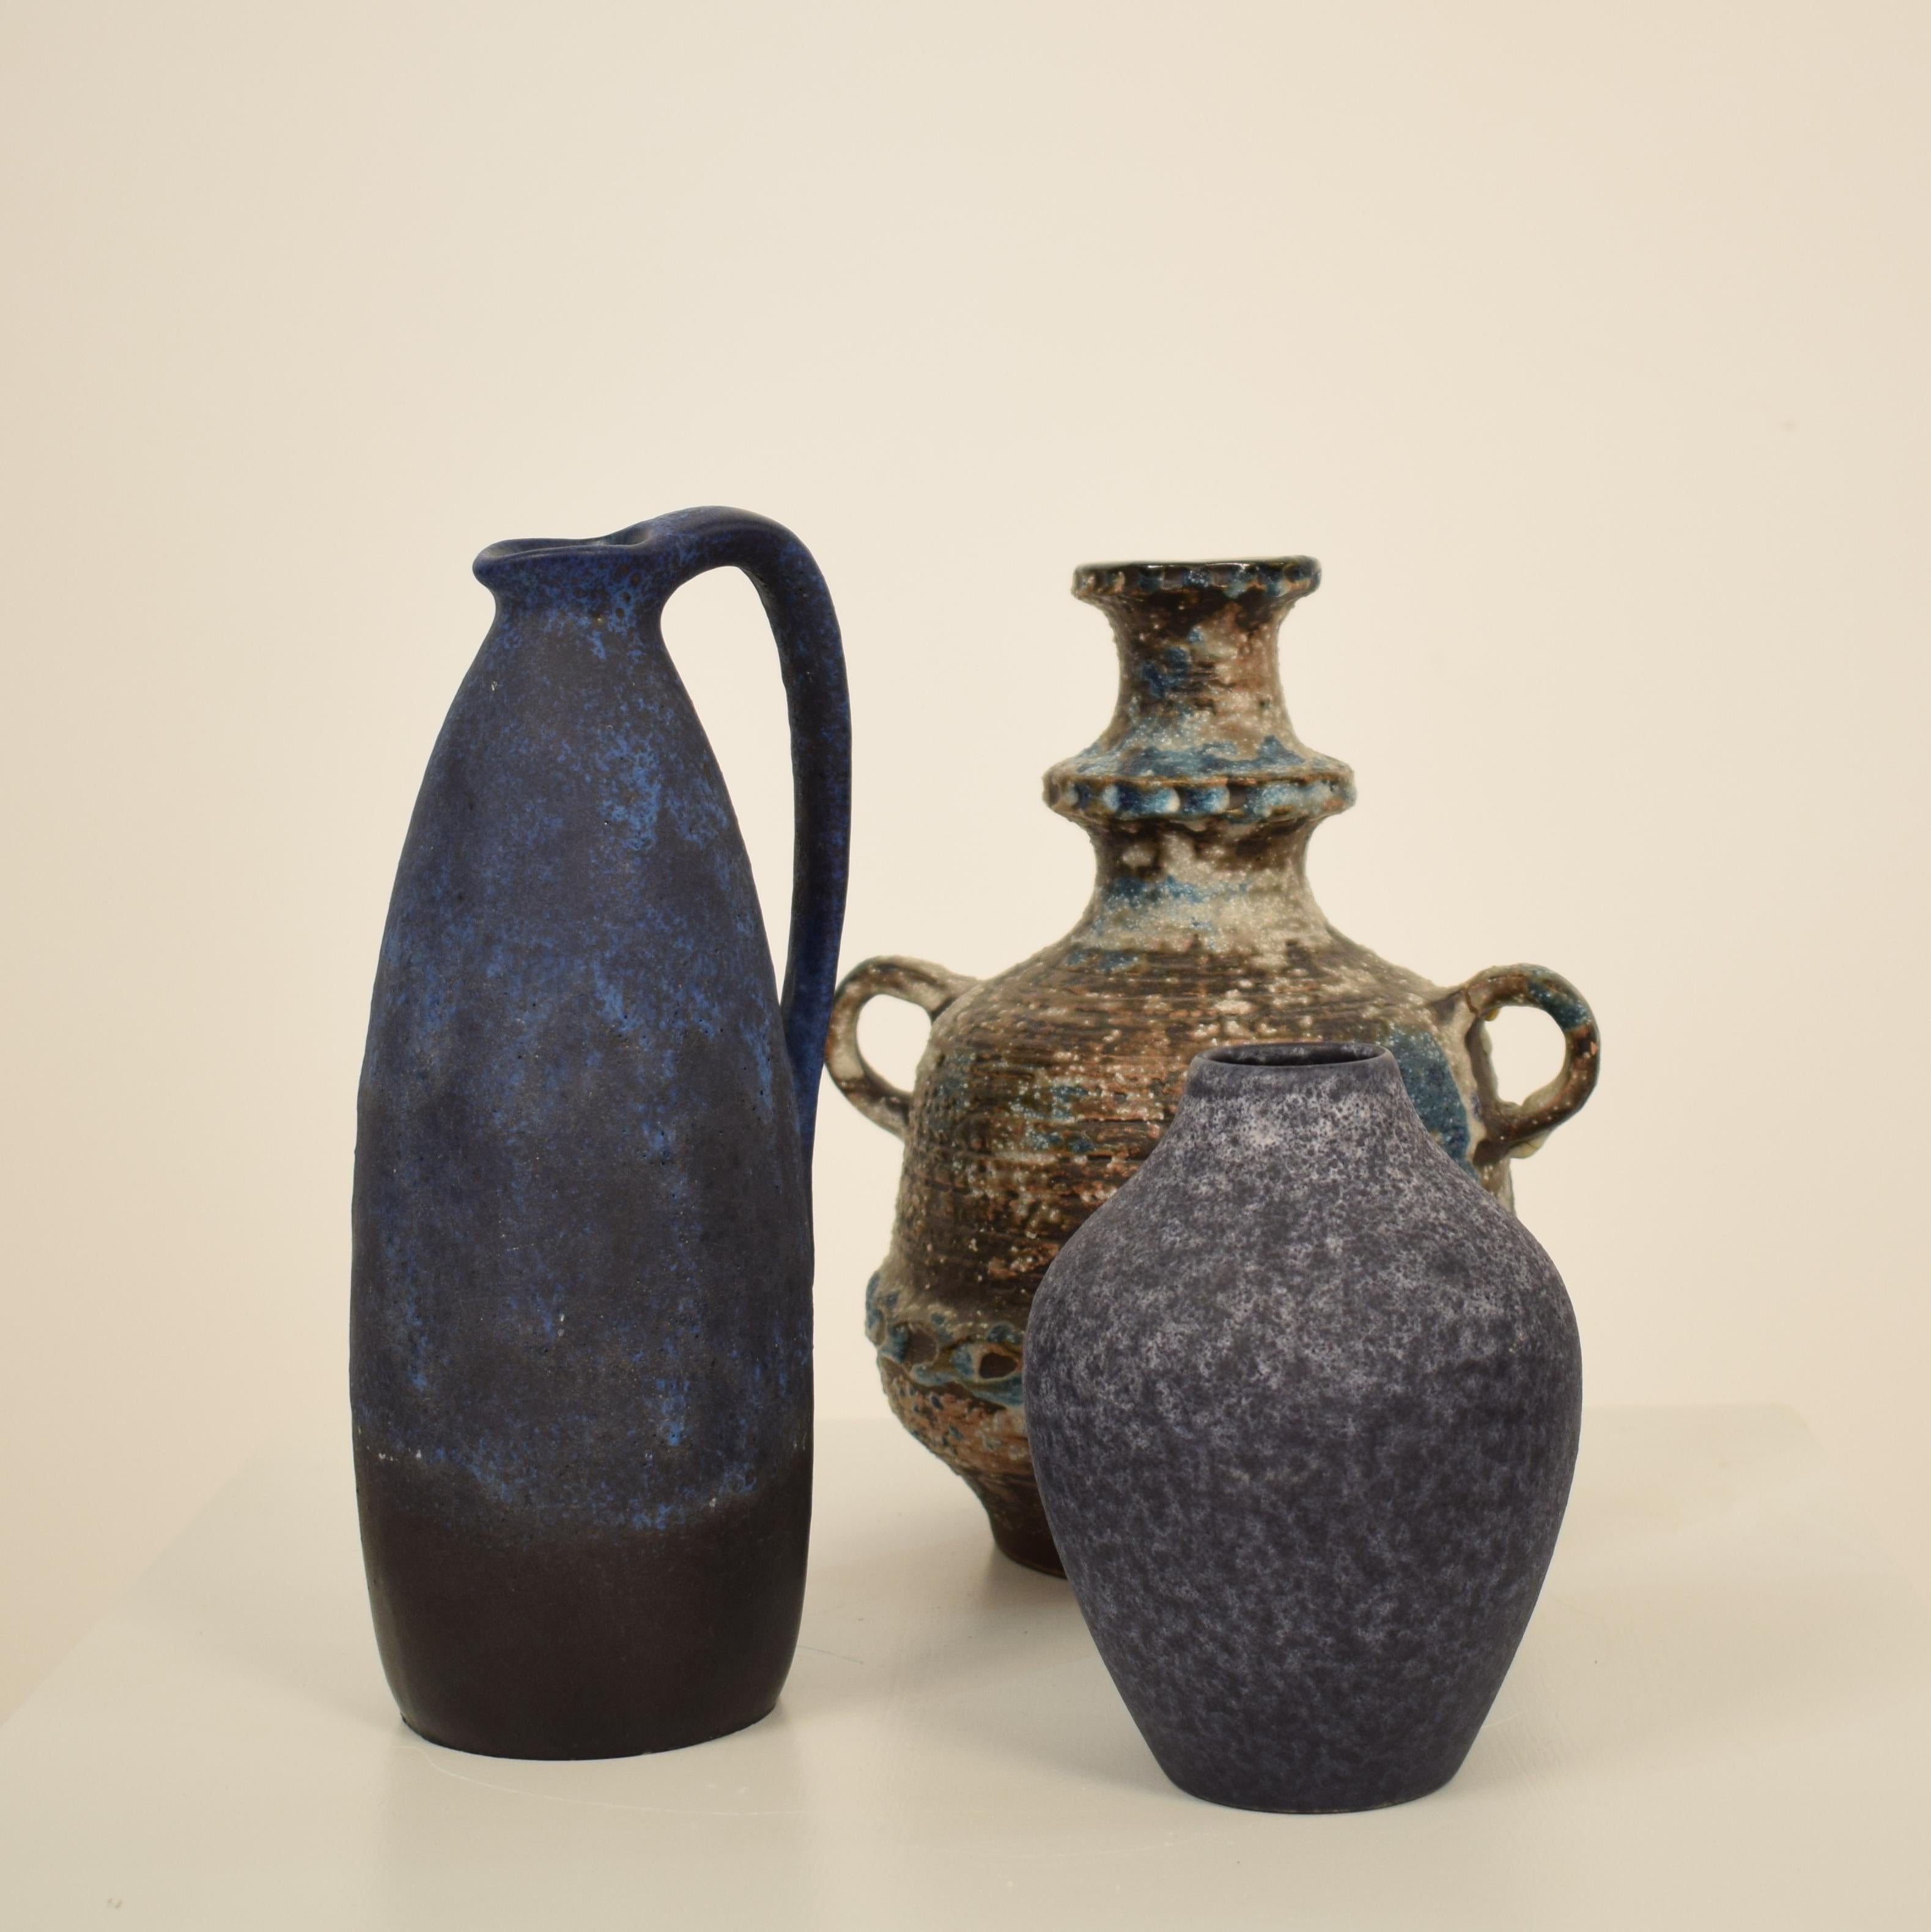 This beautiful midcentury German ceramic vase or Amphora was made in the 1970s. It is glazed in Blue
A unique piece which is a great eyecatcher for your antique, modern, Space Age or midcentury interior.
All pieces are looked after in our own